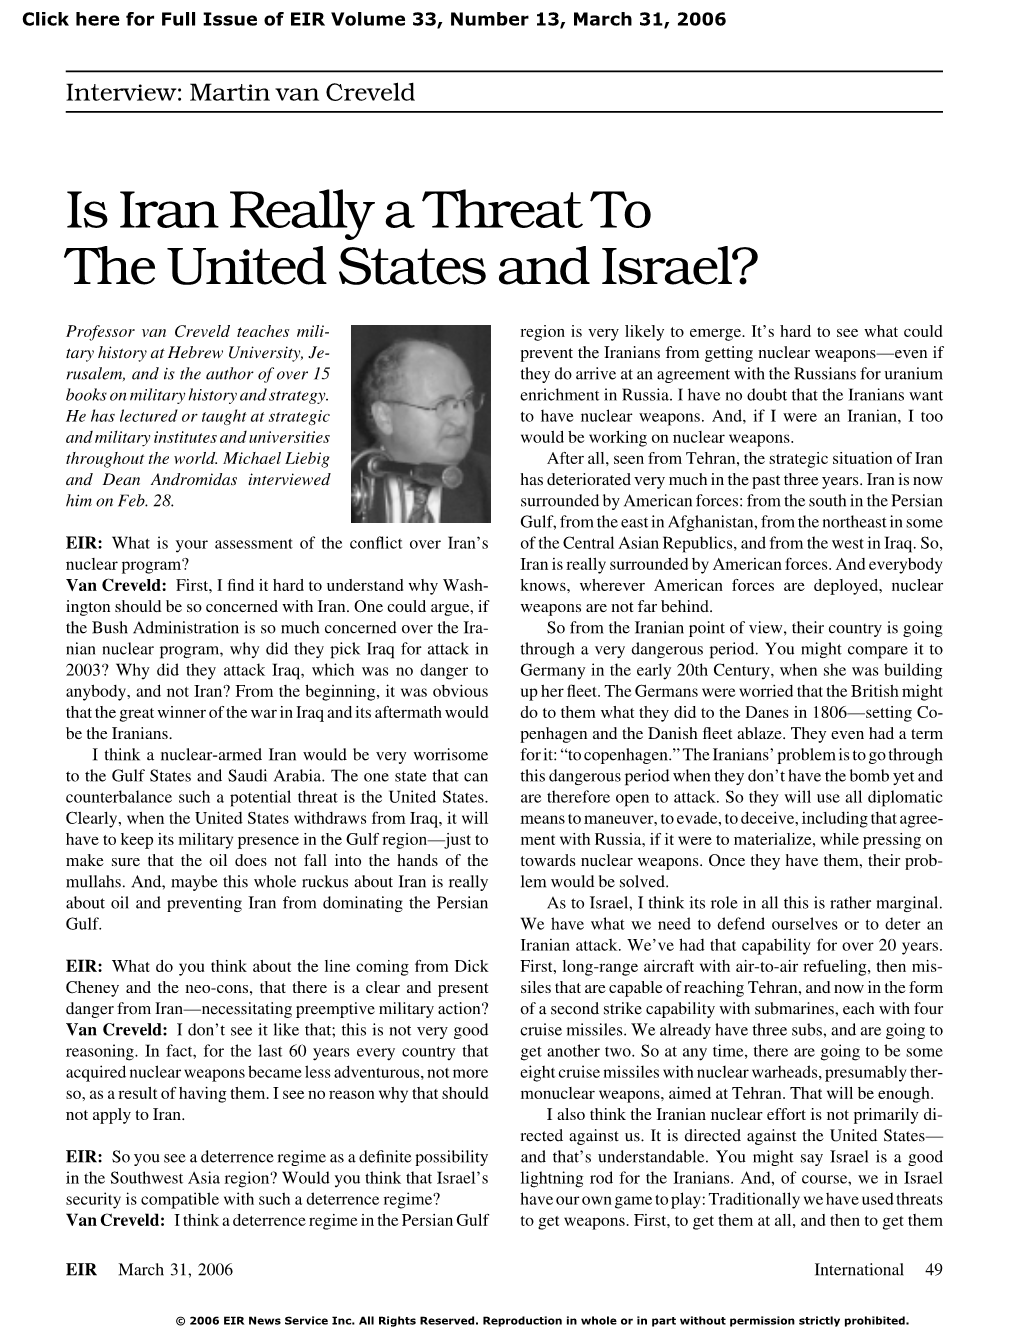 Is Iran Really a Threat to the United States and Israel?